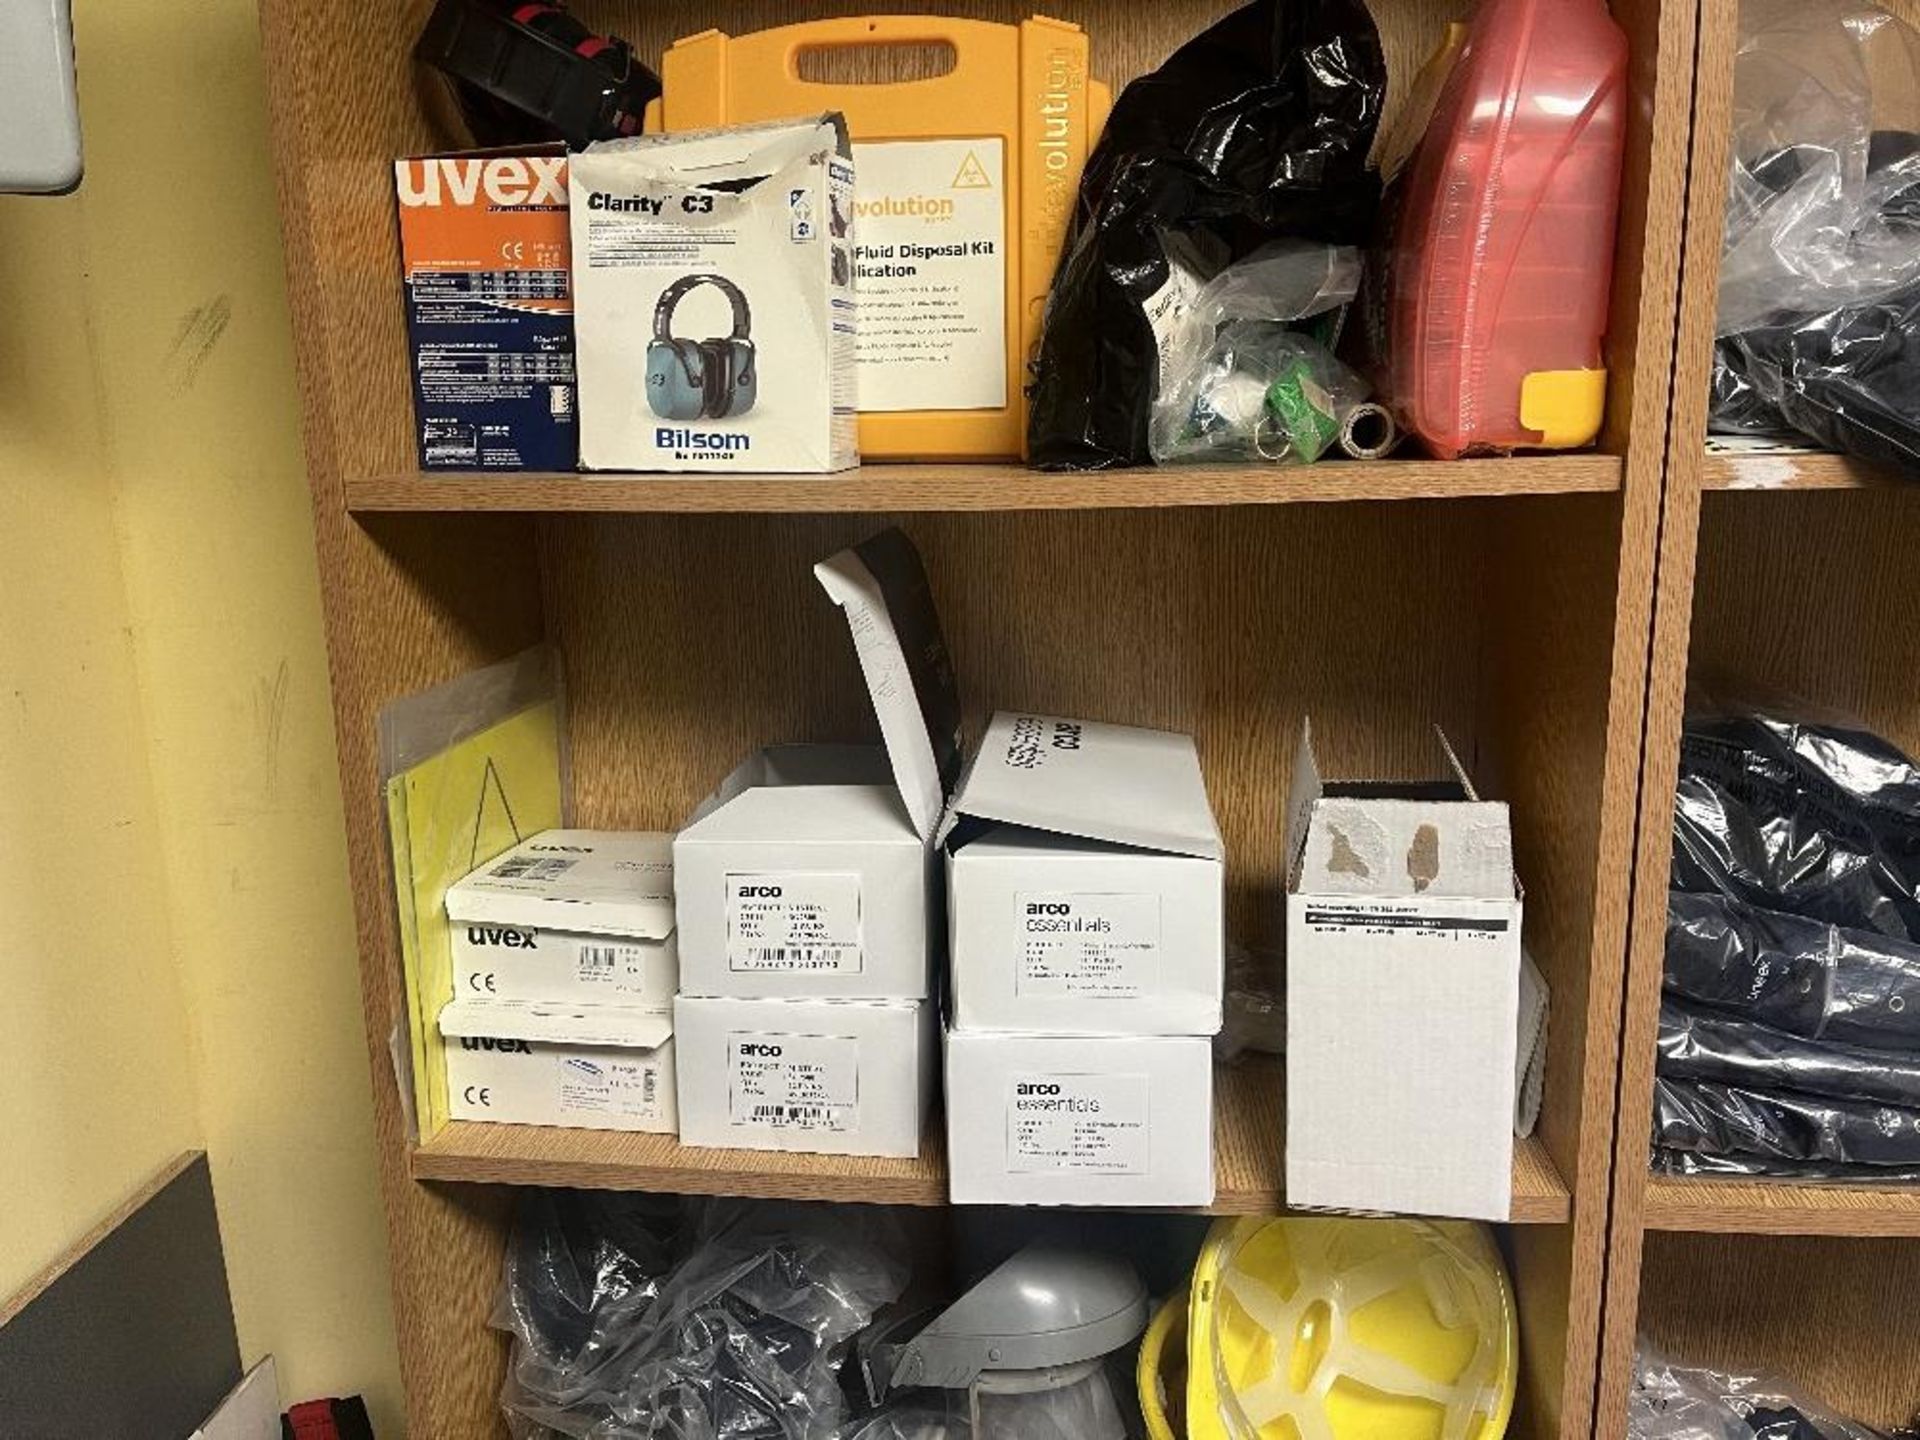 Contents of PPE shelving - Image 7 of 8